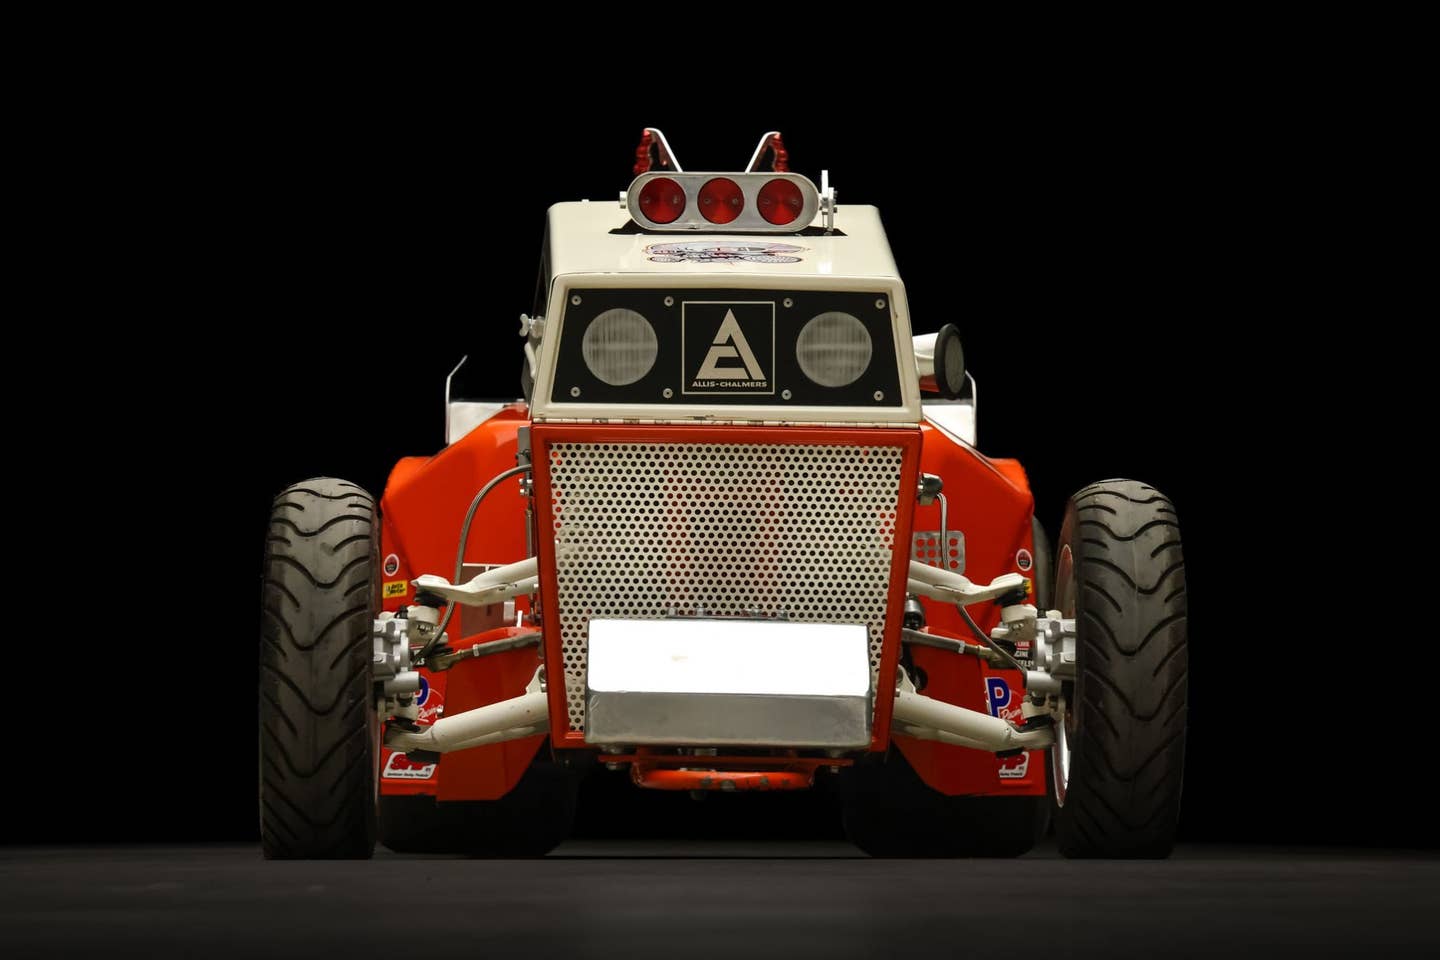 Allis-Chalmers Lawn Tractor